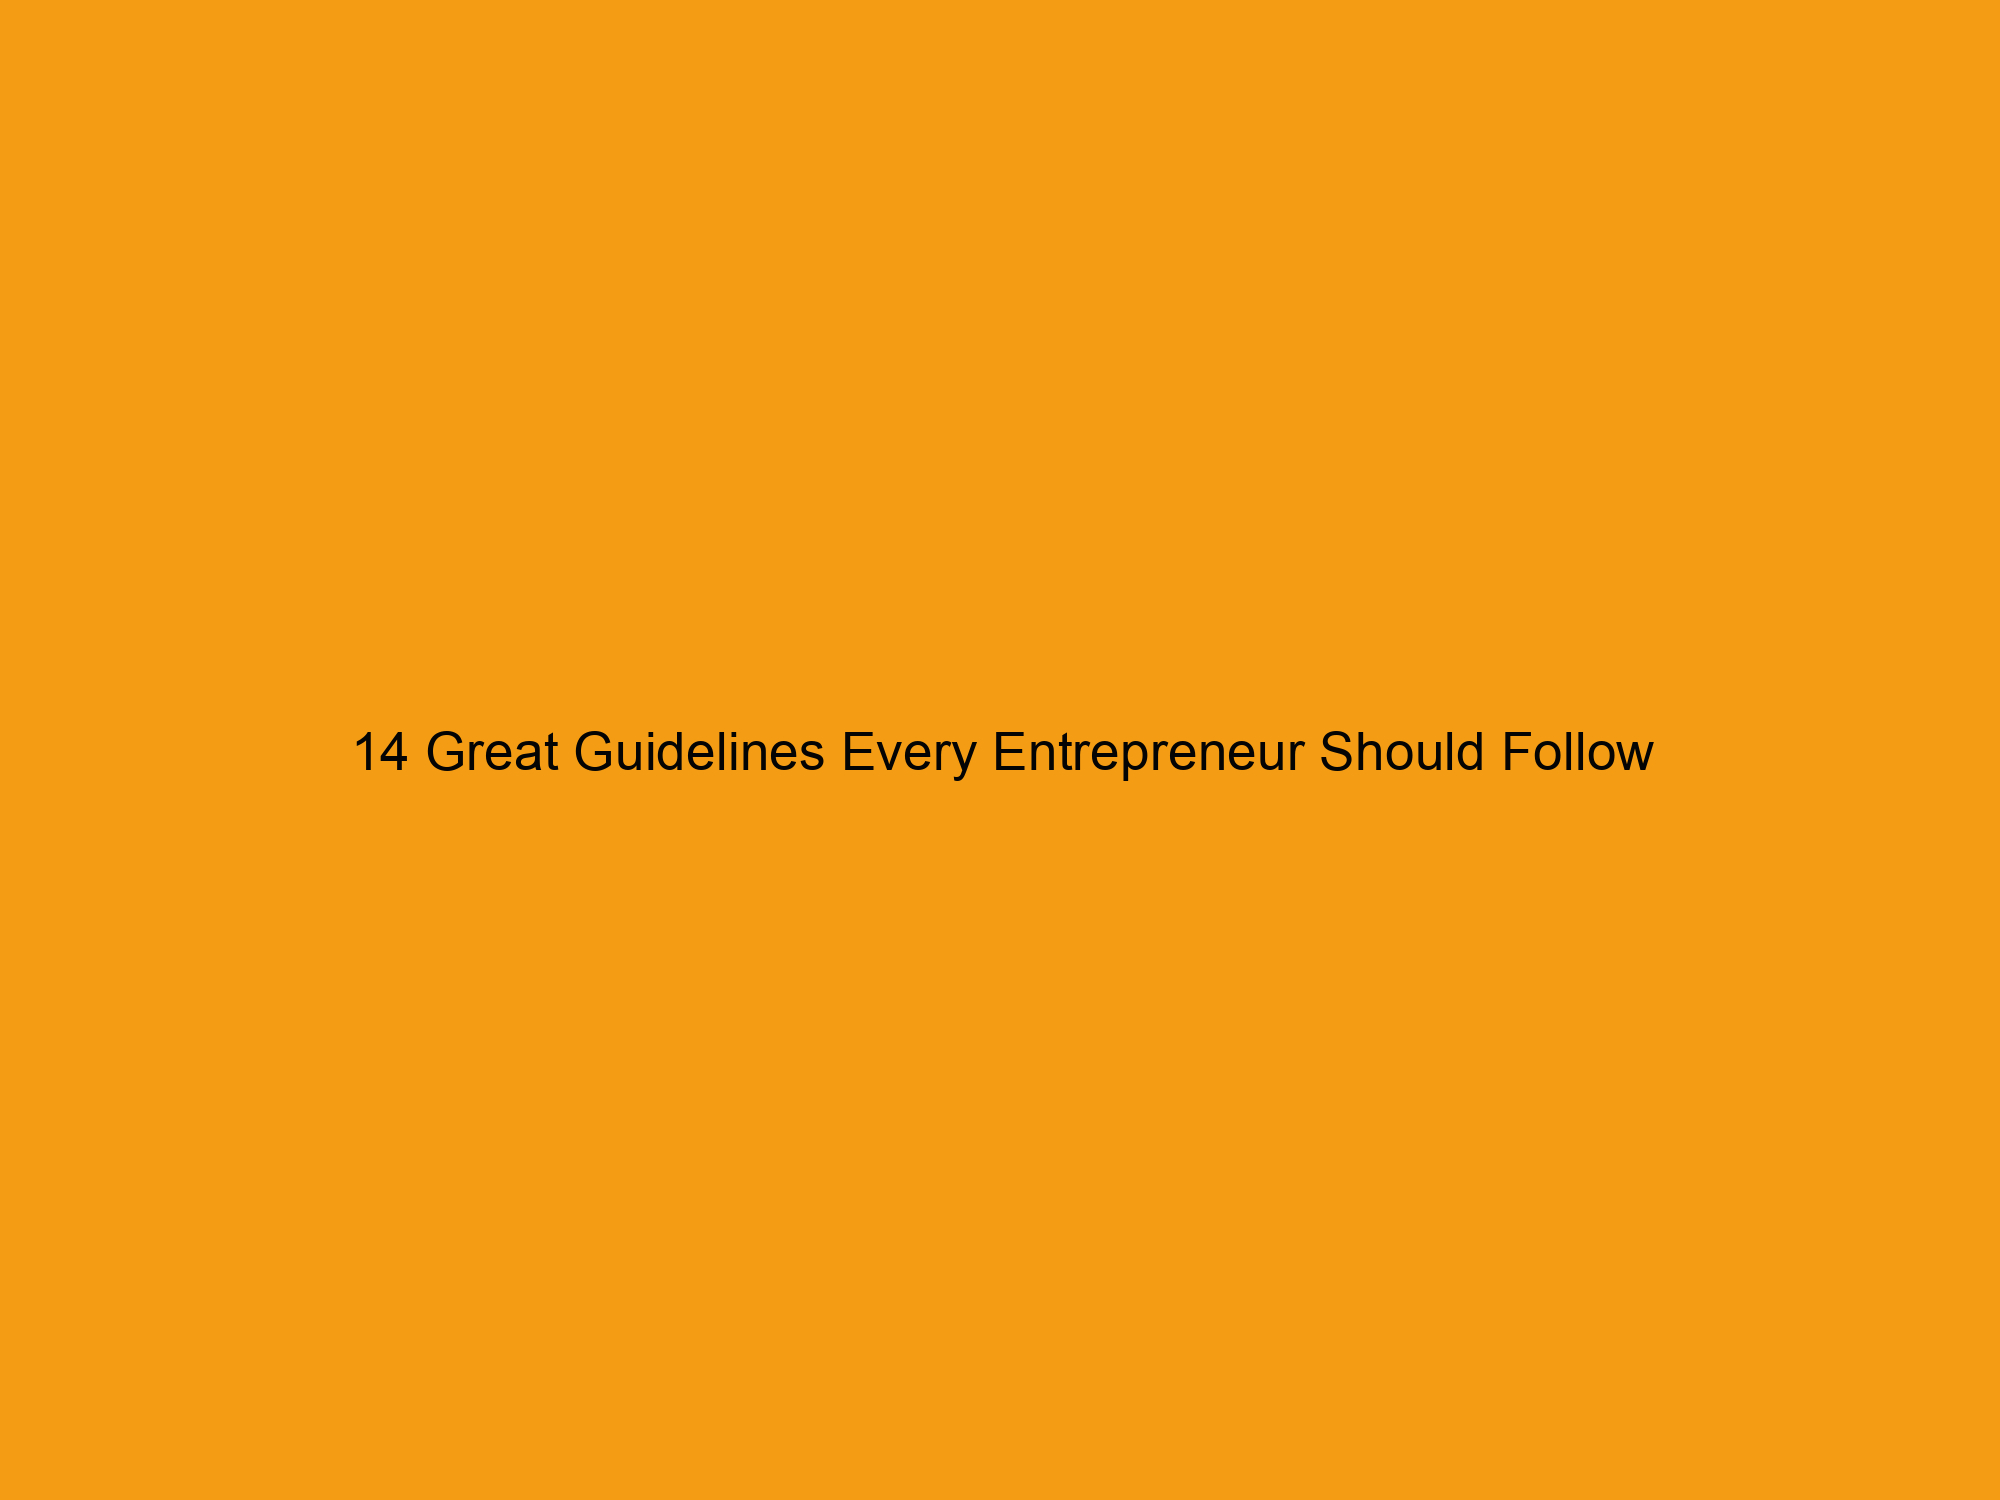 14 Great Guidelines Every Entrepreneur Should Follow